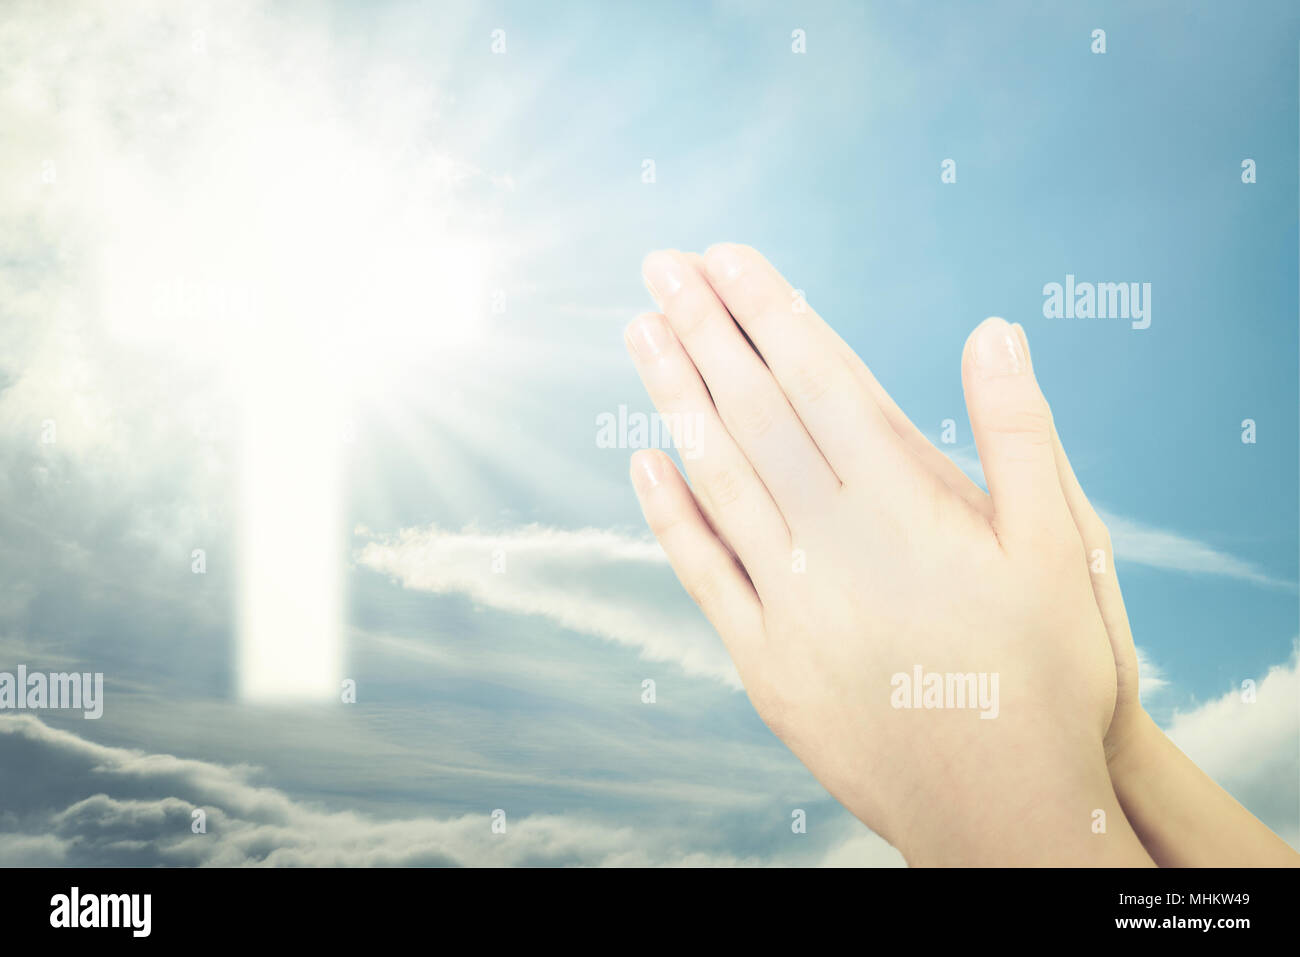 Concept of Christian prayer - folded hands for prayer against a blue sky and a shining cross sign (mixed) Stock Photo